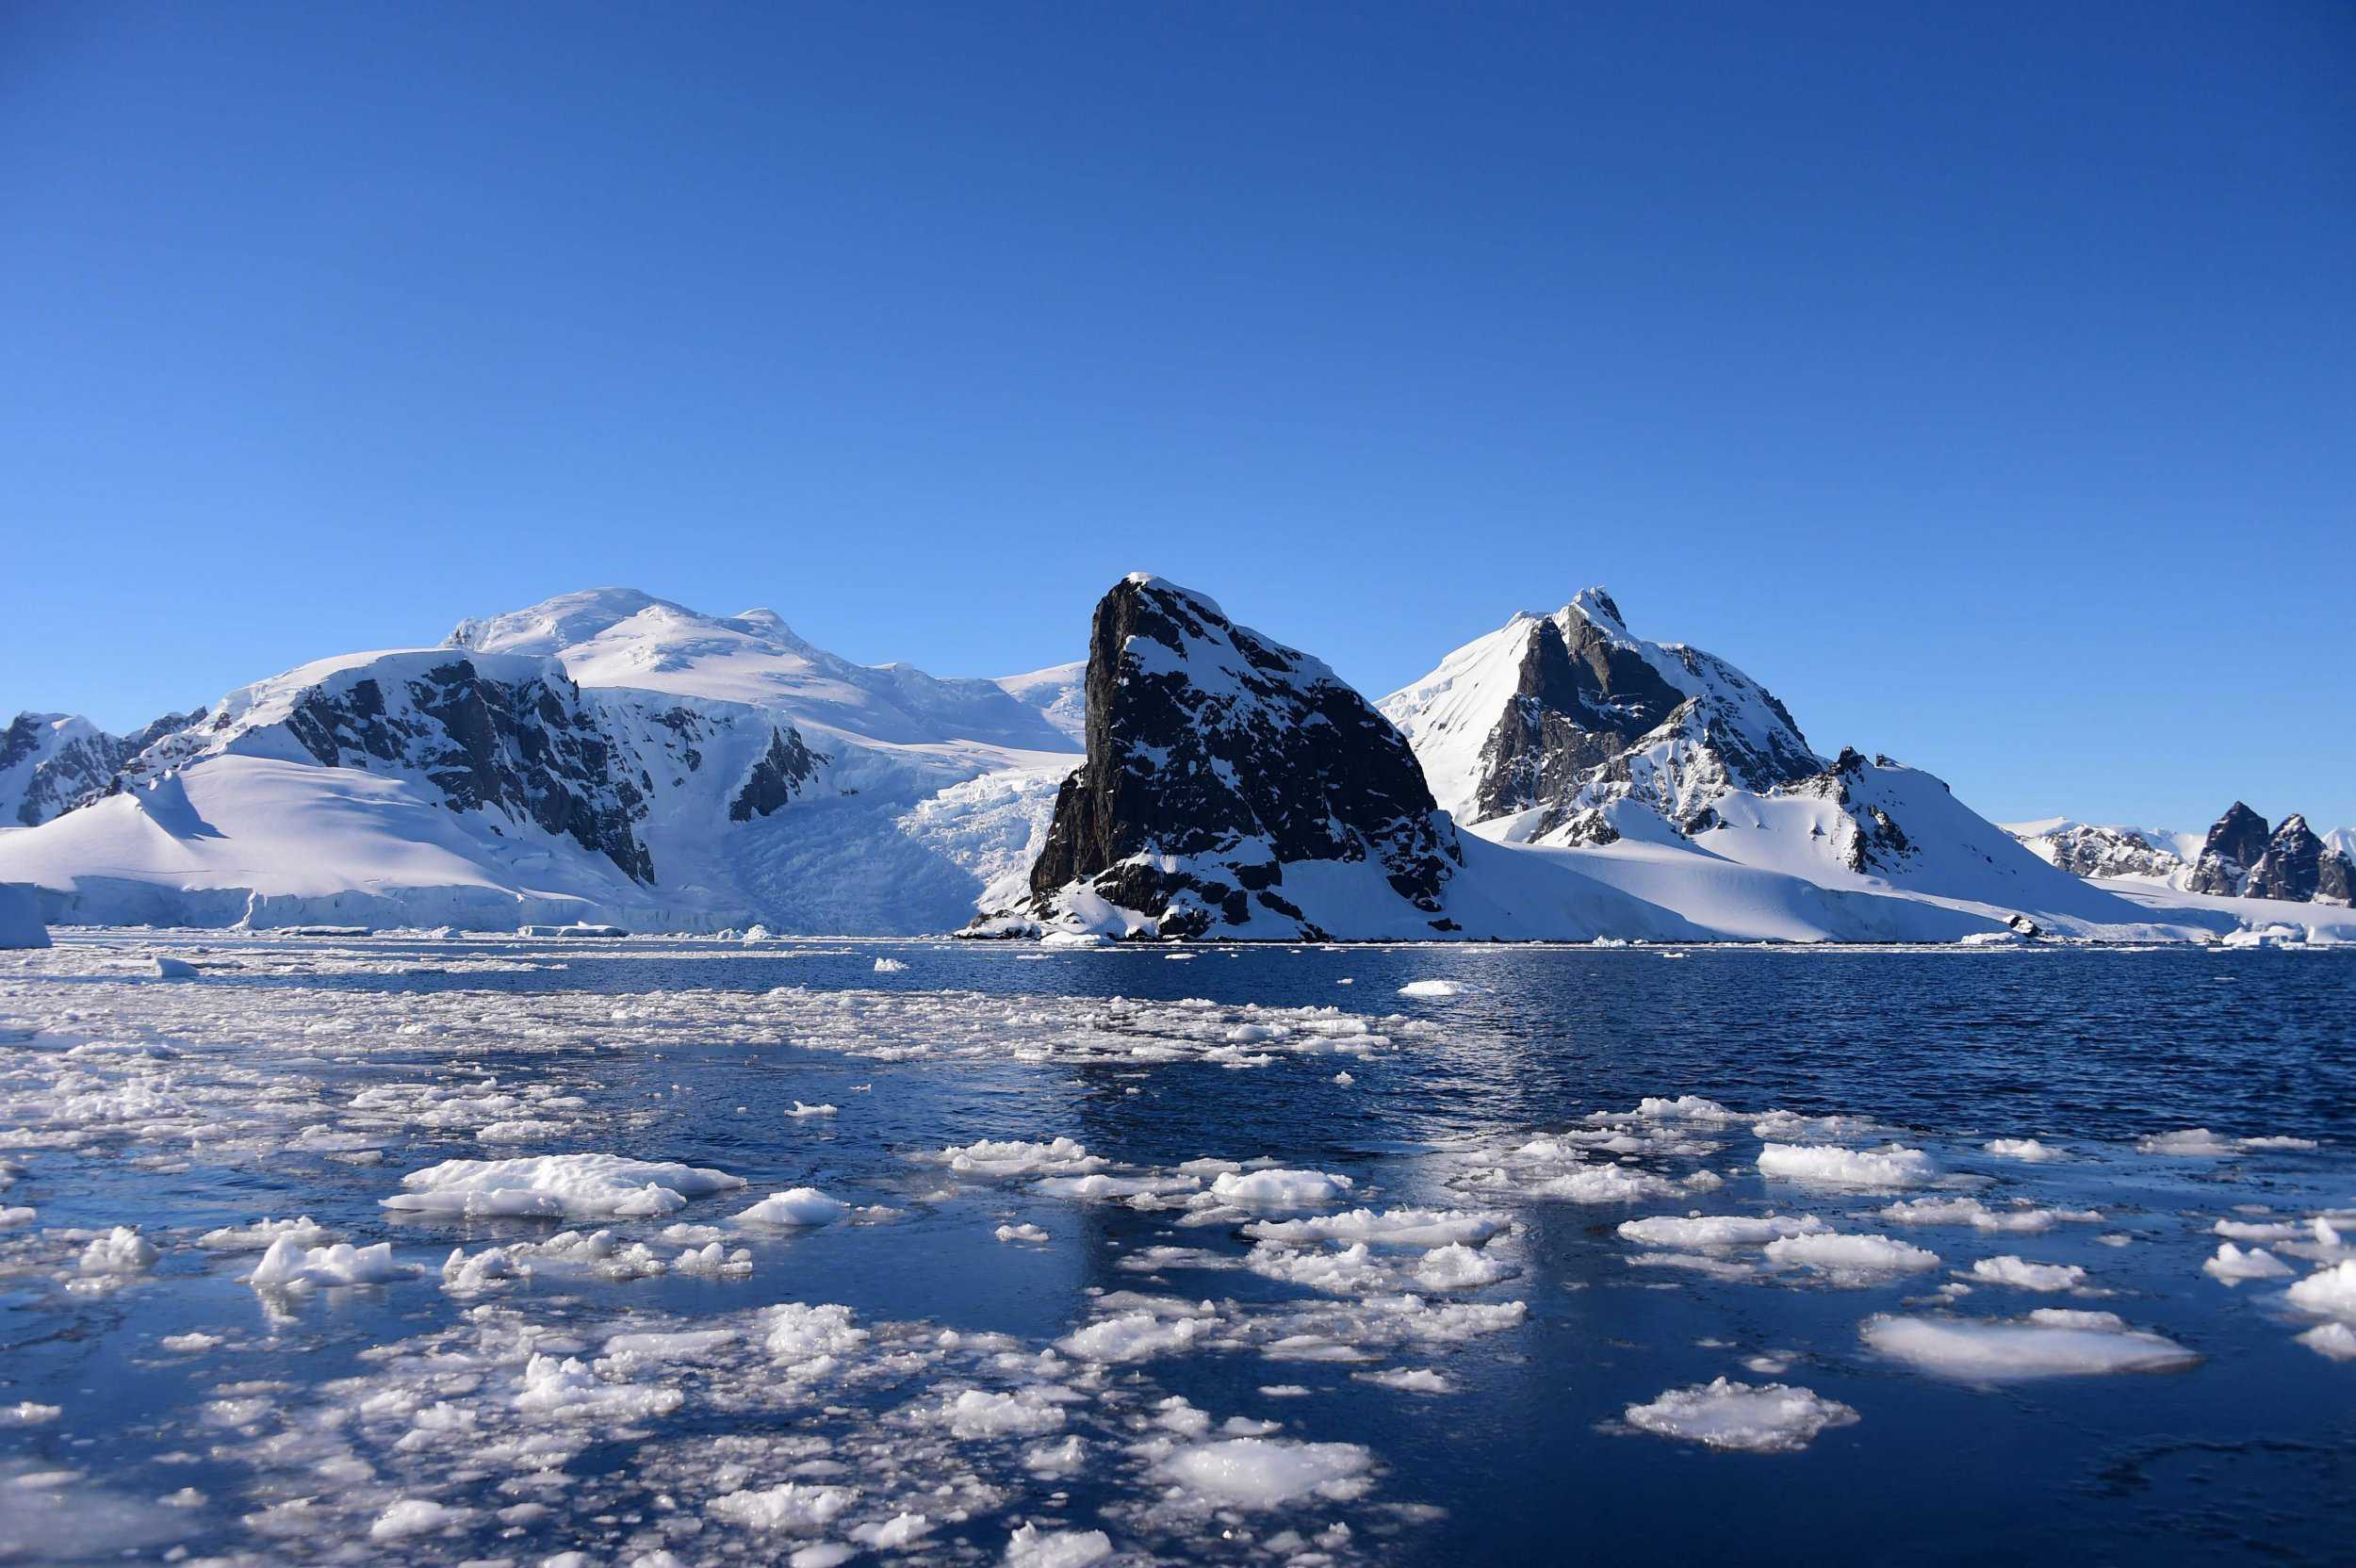 Antarctica temps go above 20 C for 1st time ever